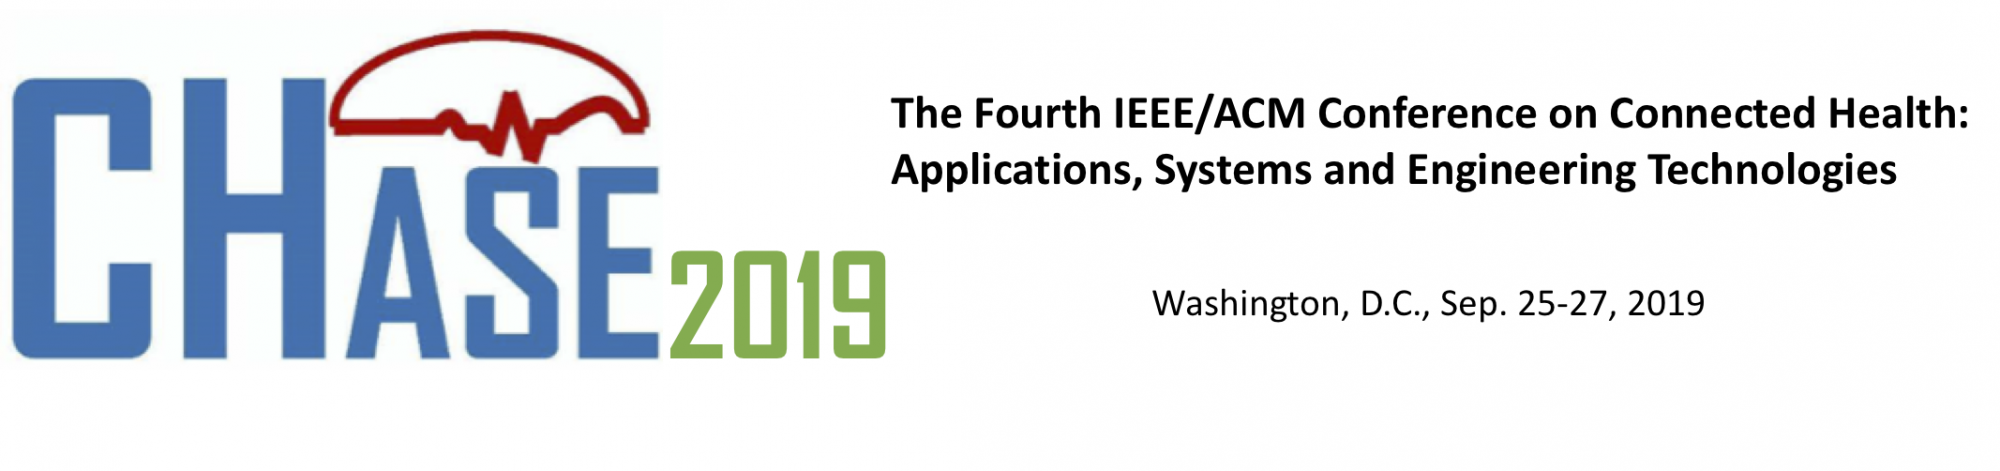 A paper was accepted to 2019 IEEE/ACM Conference on Connected Health (CHASE)